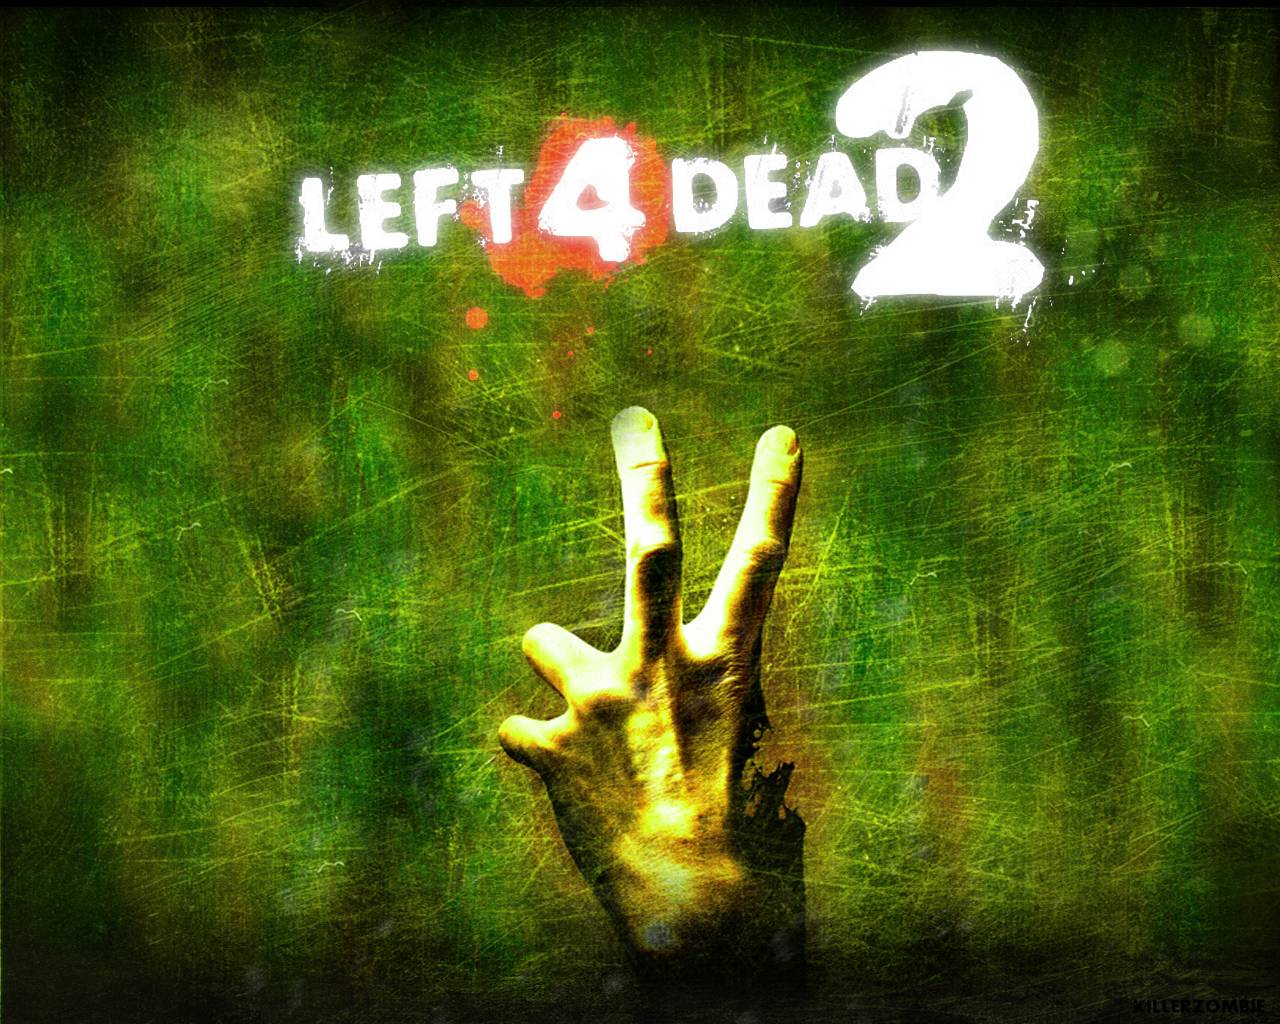 L4d2 Wallpaper Pictures, Images And Photos Photobucket , HD Wallpaper & Backgrounds